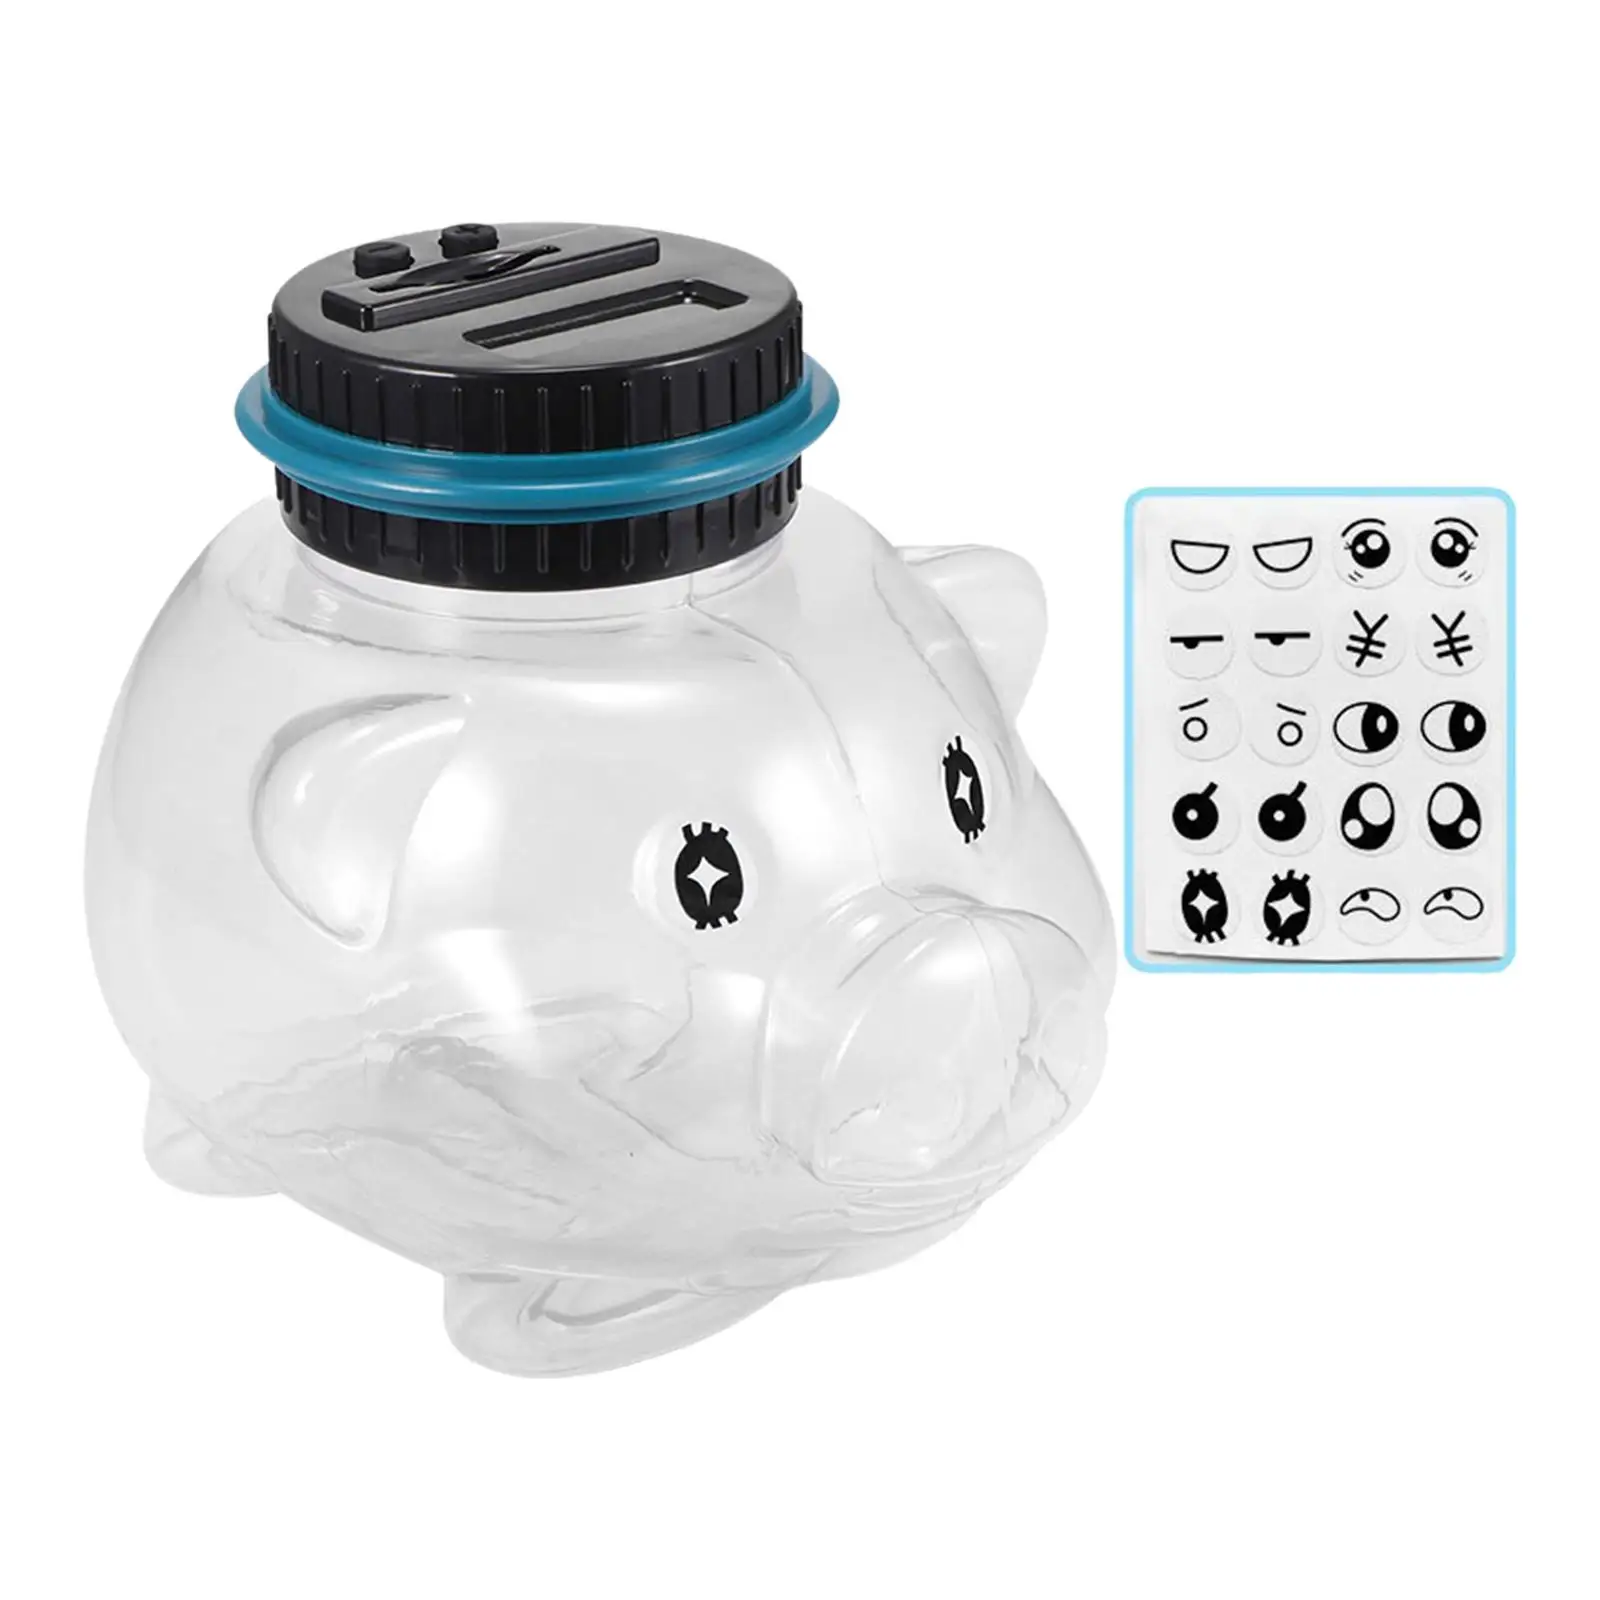 Coin Counter Bank Large Piggy Bank LCD Counter Digital Counting Money Jar Coin Saving Bank for Girls Adults Boys Friends Gifts